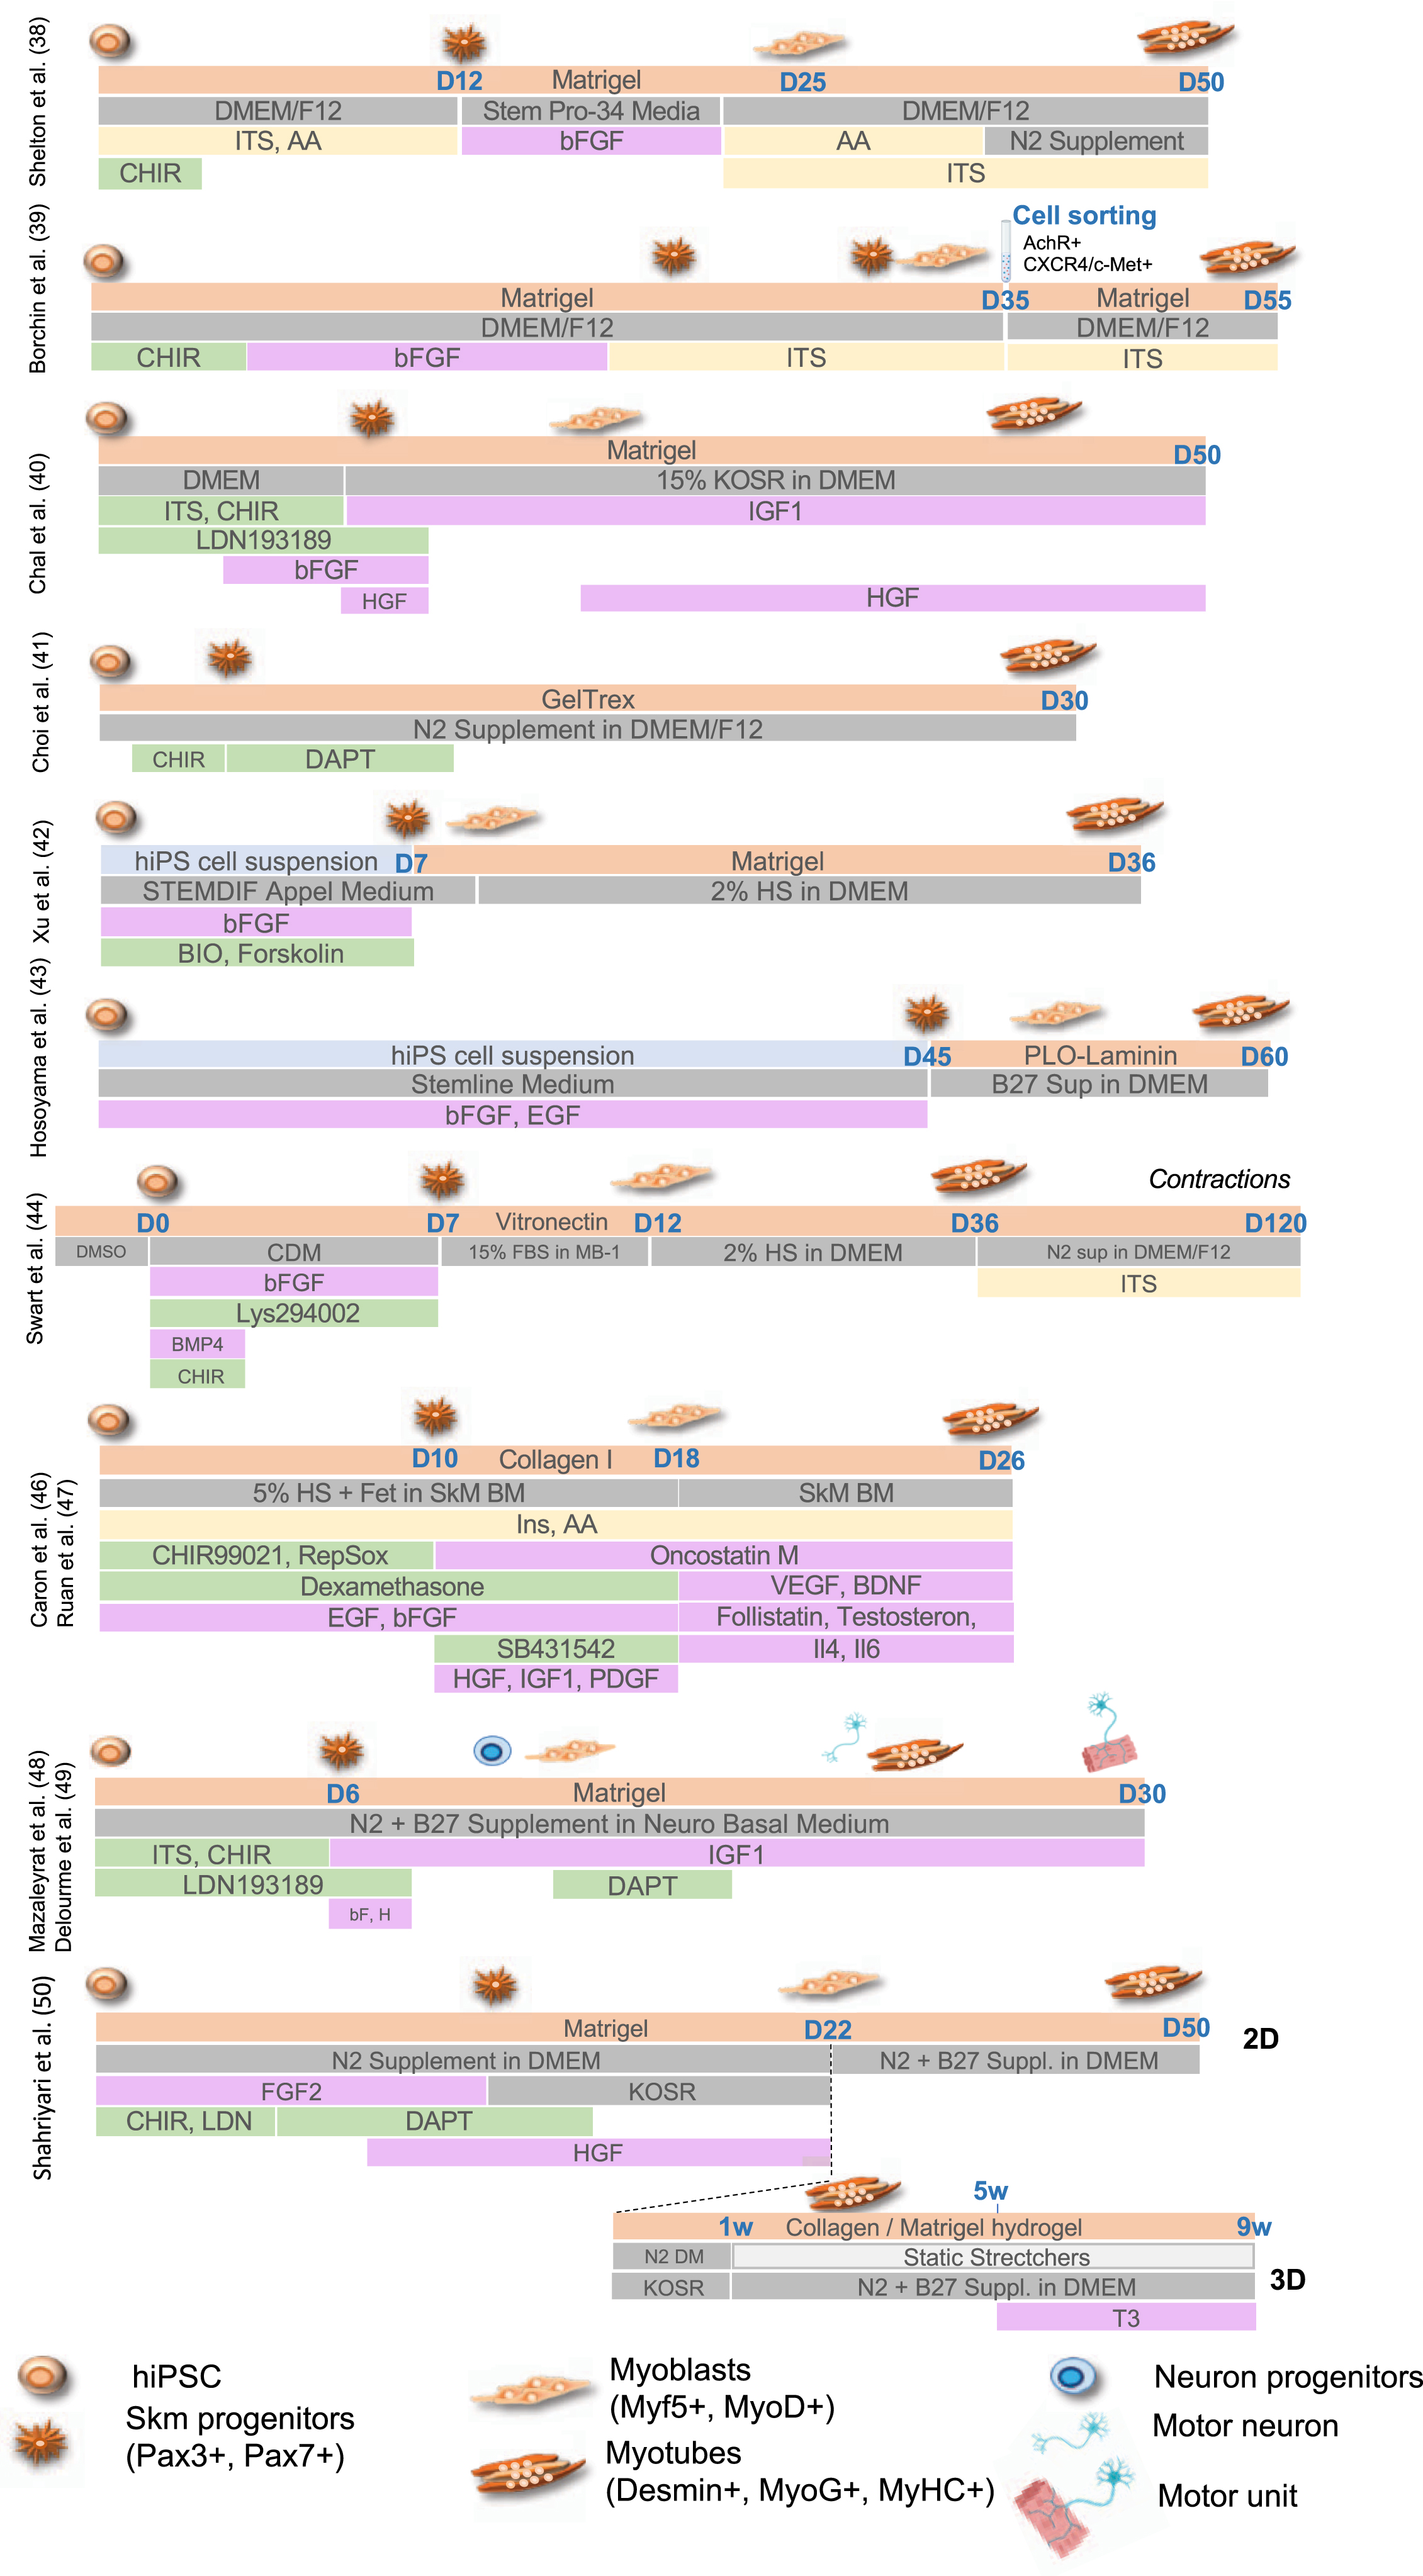 Summary of the different protocols for differentiation of human pluripotent cells toward the skeletal muscle lineage. For the different protocols, the type of coating is indicated (light orange, Matrigel, Collagen I, PLO-Laminin) together with the type of medium (dark grey; HS, Horse Serum; KOSR, Knock-out serum replacement; CDM, chemically defined medium). Growth factors and cytokines are indicated in pink (IGF1, Insulin Growth Factor 1; bFGF, basic Fibroblast growth factor; HGF, hepatocyte growth factor; EGF, Epithelial Growth Factor, PDGF, Platelet derived growth factor; VEGF, Vascular Endothelial Growth Factor; BDNF, Brain Derived Neurotrophic Factor; Il4, Interleukin 4; IL§, Interleukin 6). Cell culture supplements are in yellow (ITS, Insulin-Transferrin-Selenium; AA, non-essential amino acids). Small molecules are indicated in green (CHIR, Chiron 99021, Wnt3a or GSK3β inhibitor; Bio (GSK3β inhibitor); Forskolin (Adenylyl Cyclase activator); Dexamethasone; LDN193189, BMP inhibitor; DAPT, γ secretase inhibitor; SB431542, Ai, RepSox, selective Alk5 inhibitor).